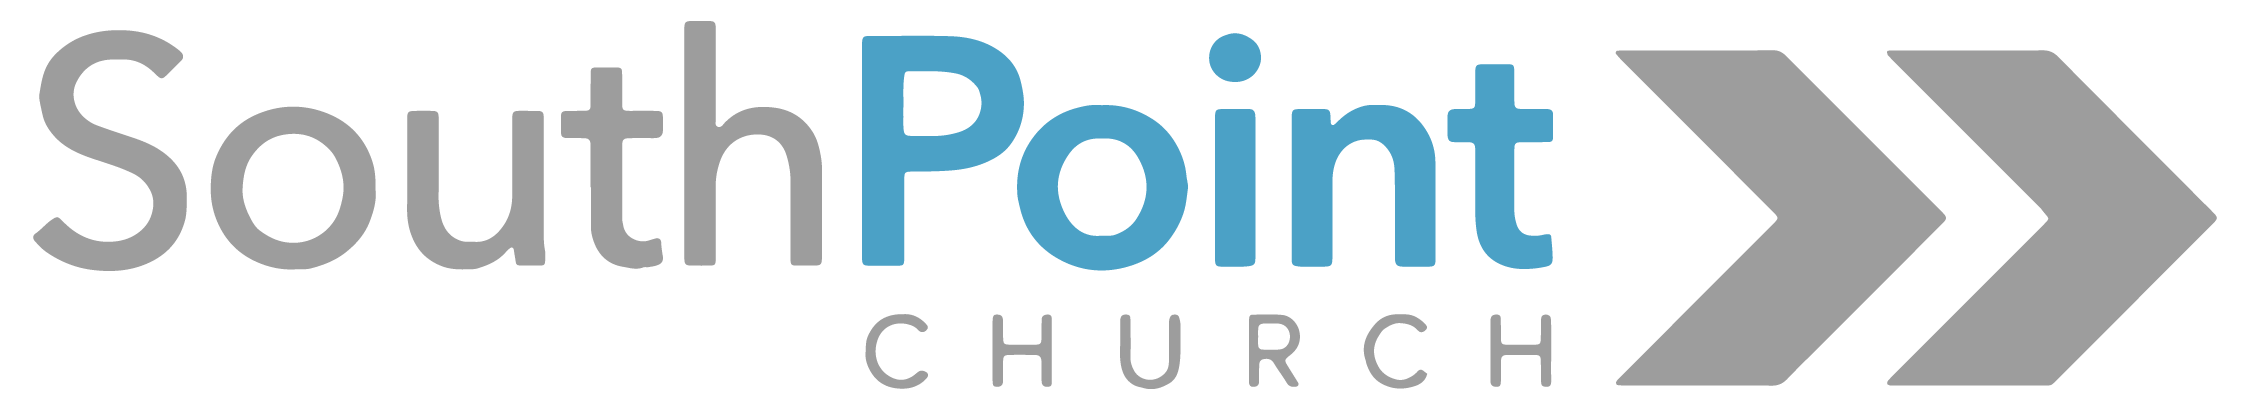 SouthPoint Church